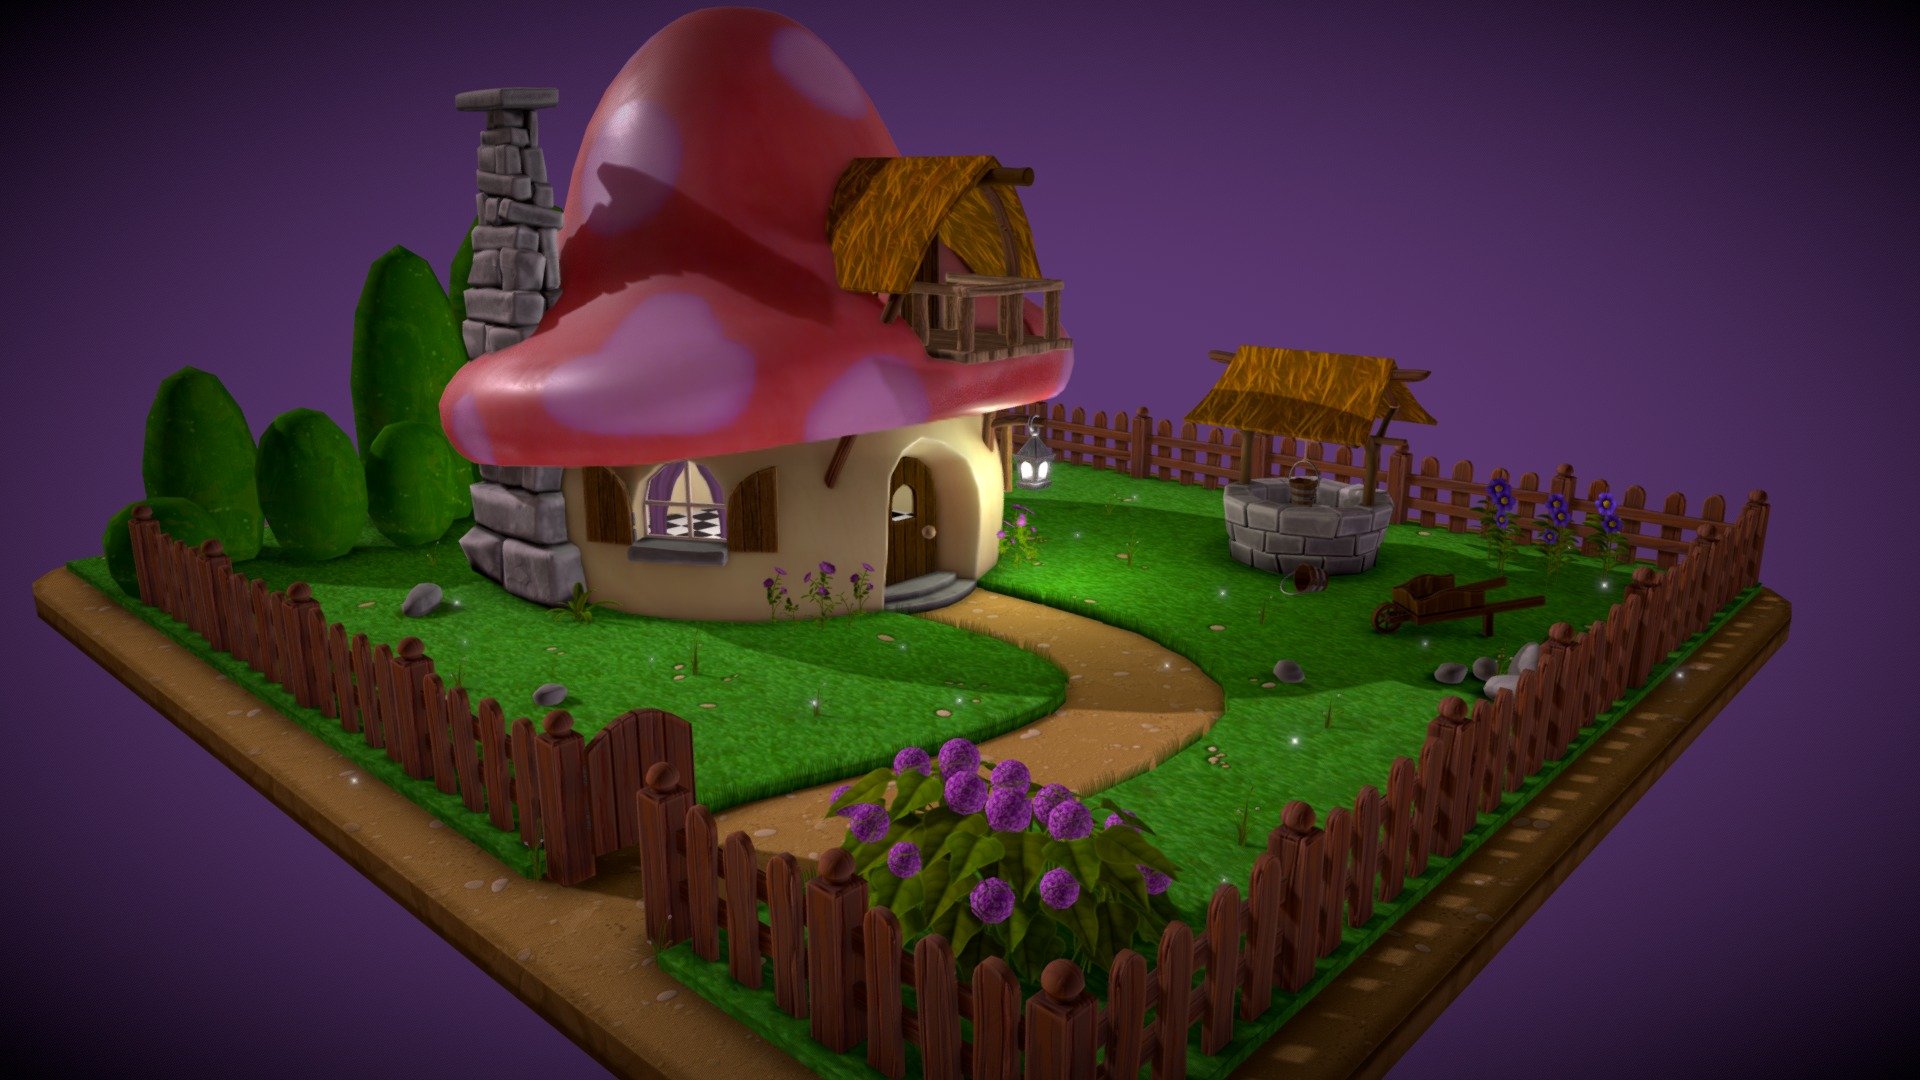 I took the original artwork by Peyo (the Smurfs creator) and adapted to a 3D environment.
It was very fun to work with this art.
I tried to keep the artistic aspect (kind of handpaint with watercolor and paint brushes) with a low poly count, but also give a personal touch of realism to the scene.
I just miss the fuss of the Smurfs in the scene. Maybe someday I model one smurf and duplicate a bunch of them through the village to make it more fun.
I hope you enjoy 3d model